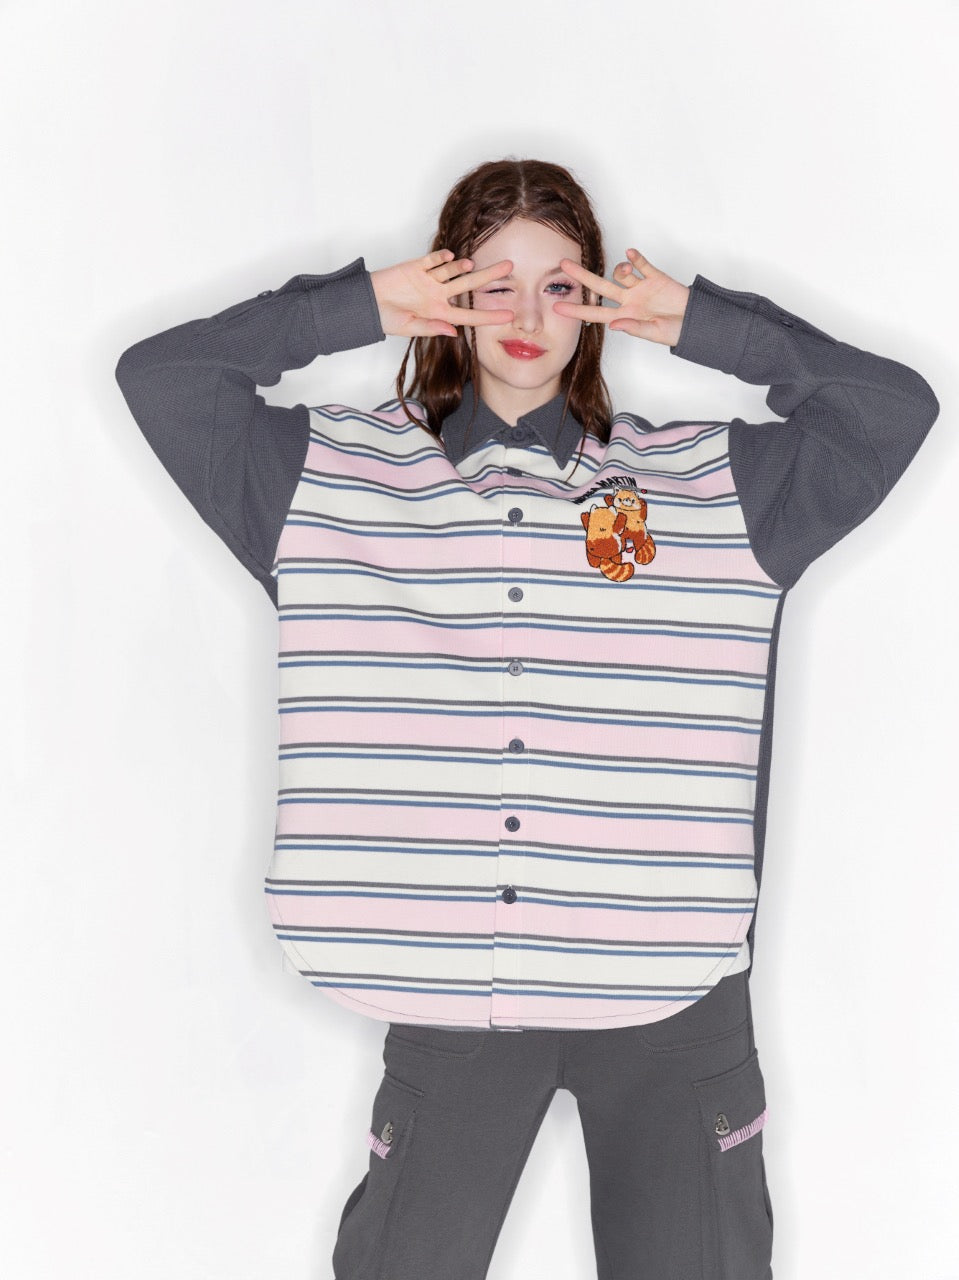 Andrea Martin Grey and Pink Red Panda Striped Patchwork Shirt